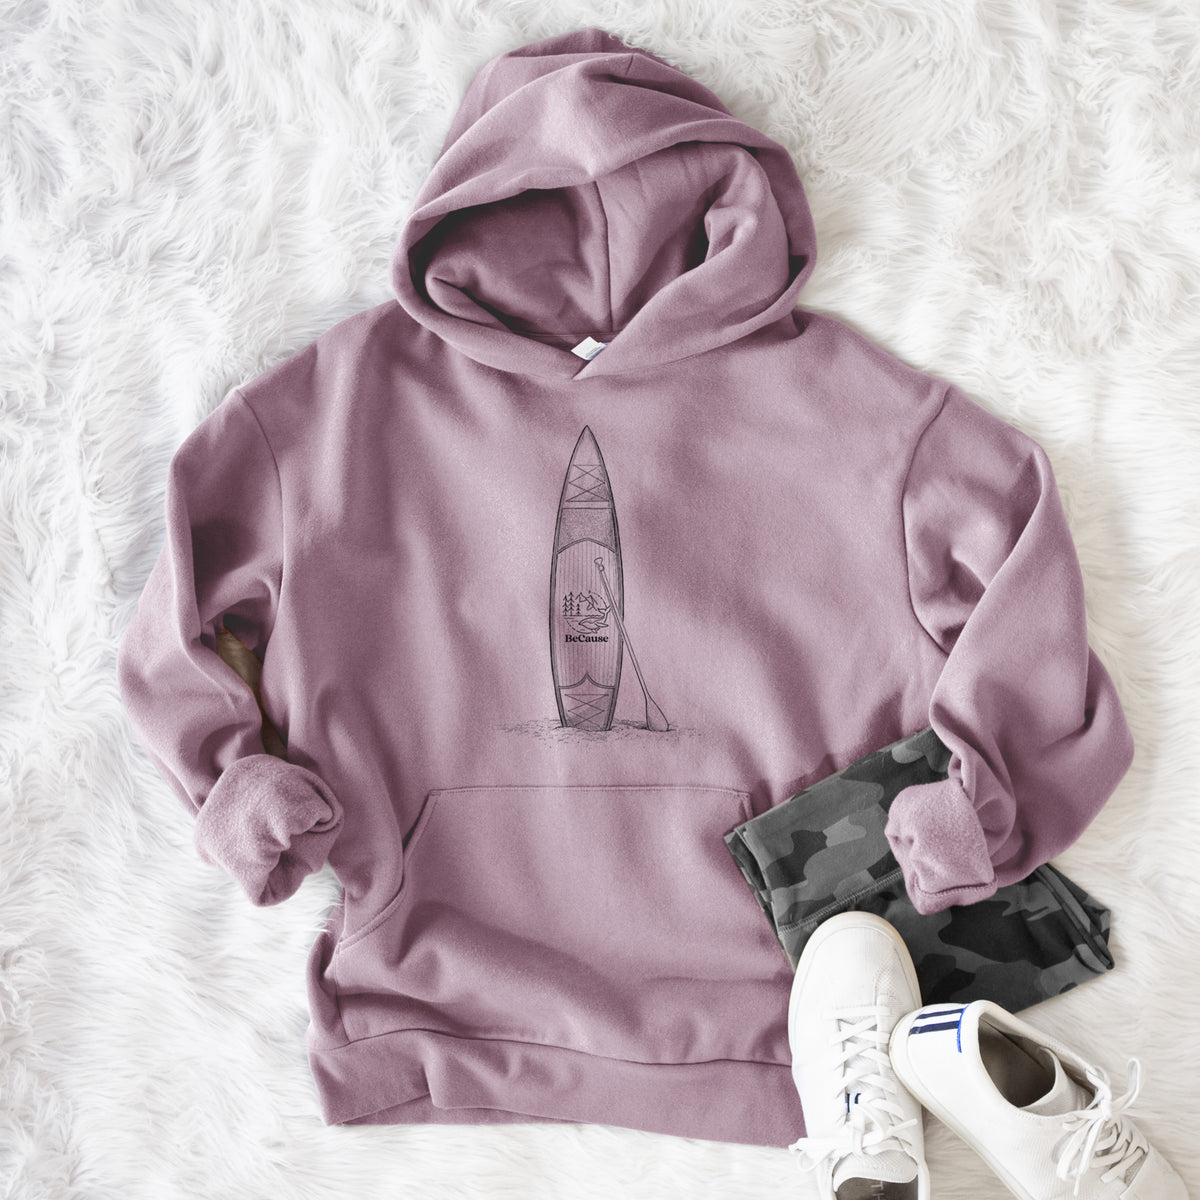 Stand-up Paddle Board  - Bodega Midweight Hoodie